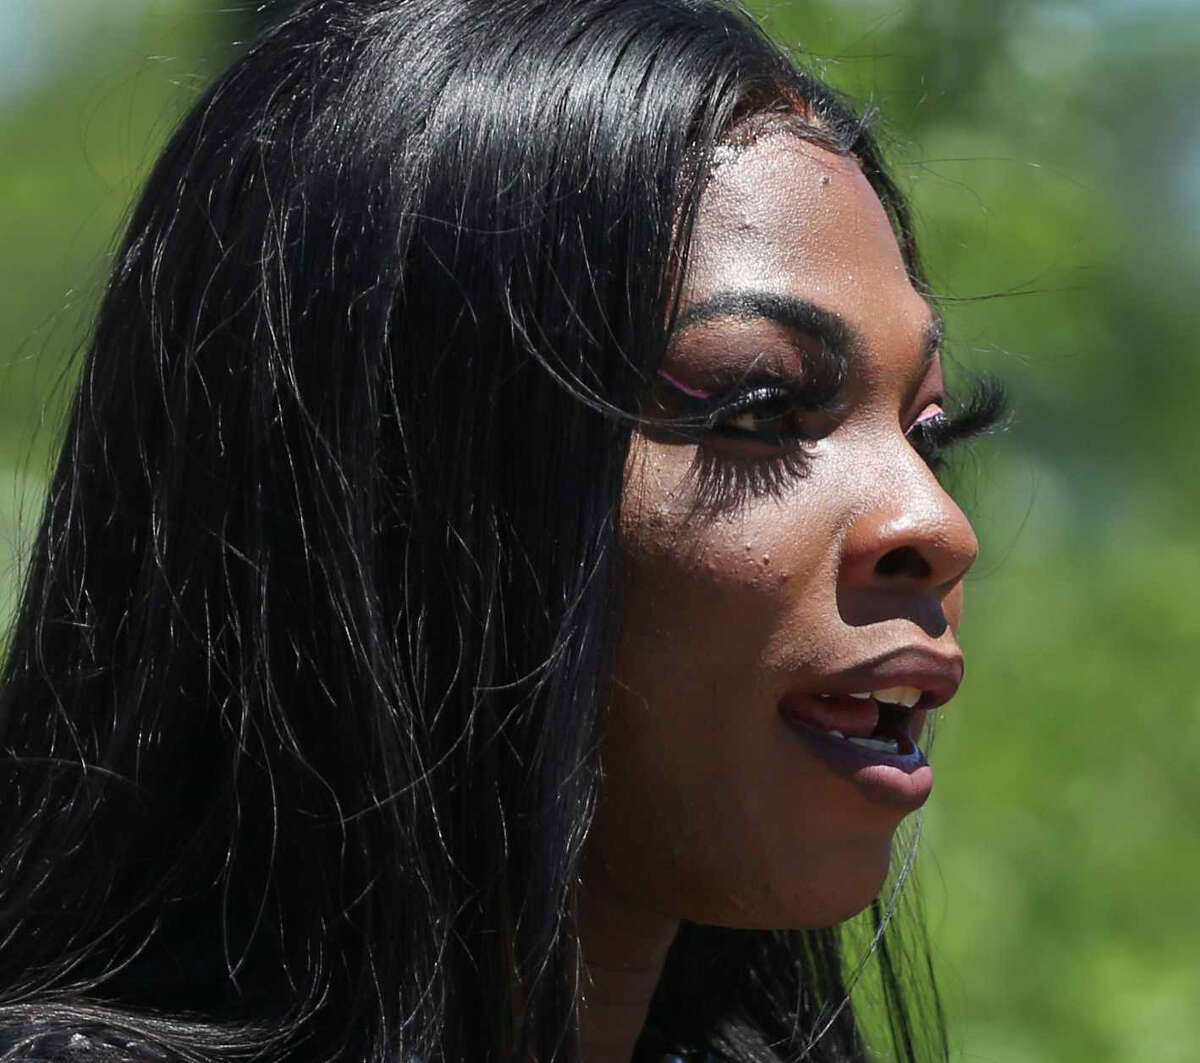 In this Friday, April 20, 2019 photo, Muhlaysia Booker speaks during a rally in Dallas. Booker, a transgender woman seen on a widely circulated video being beaten on April 12 in front of a crowd of people, was found dead Saturday, May 18 in a Dallas shooting. No suspect has been identified. (Ryan Michalesko/The Dallas Morning News via AP)